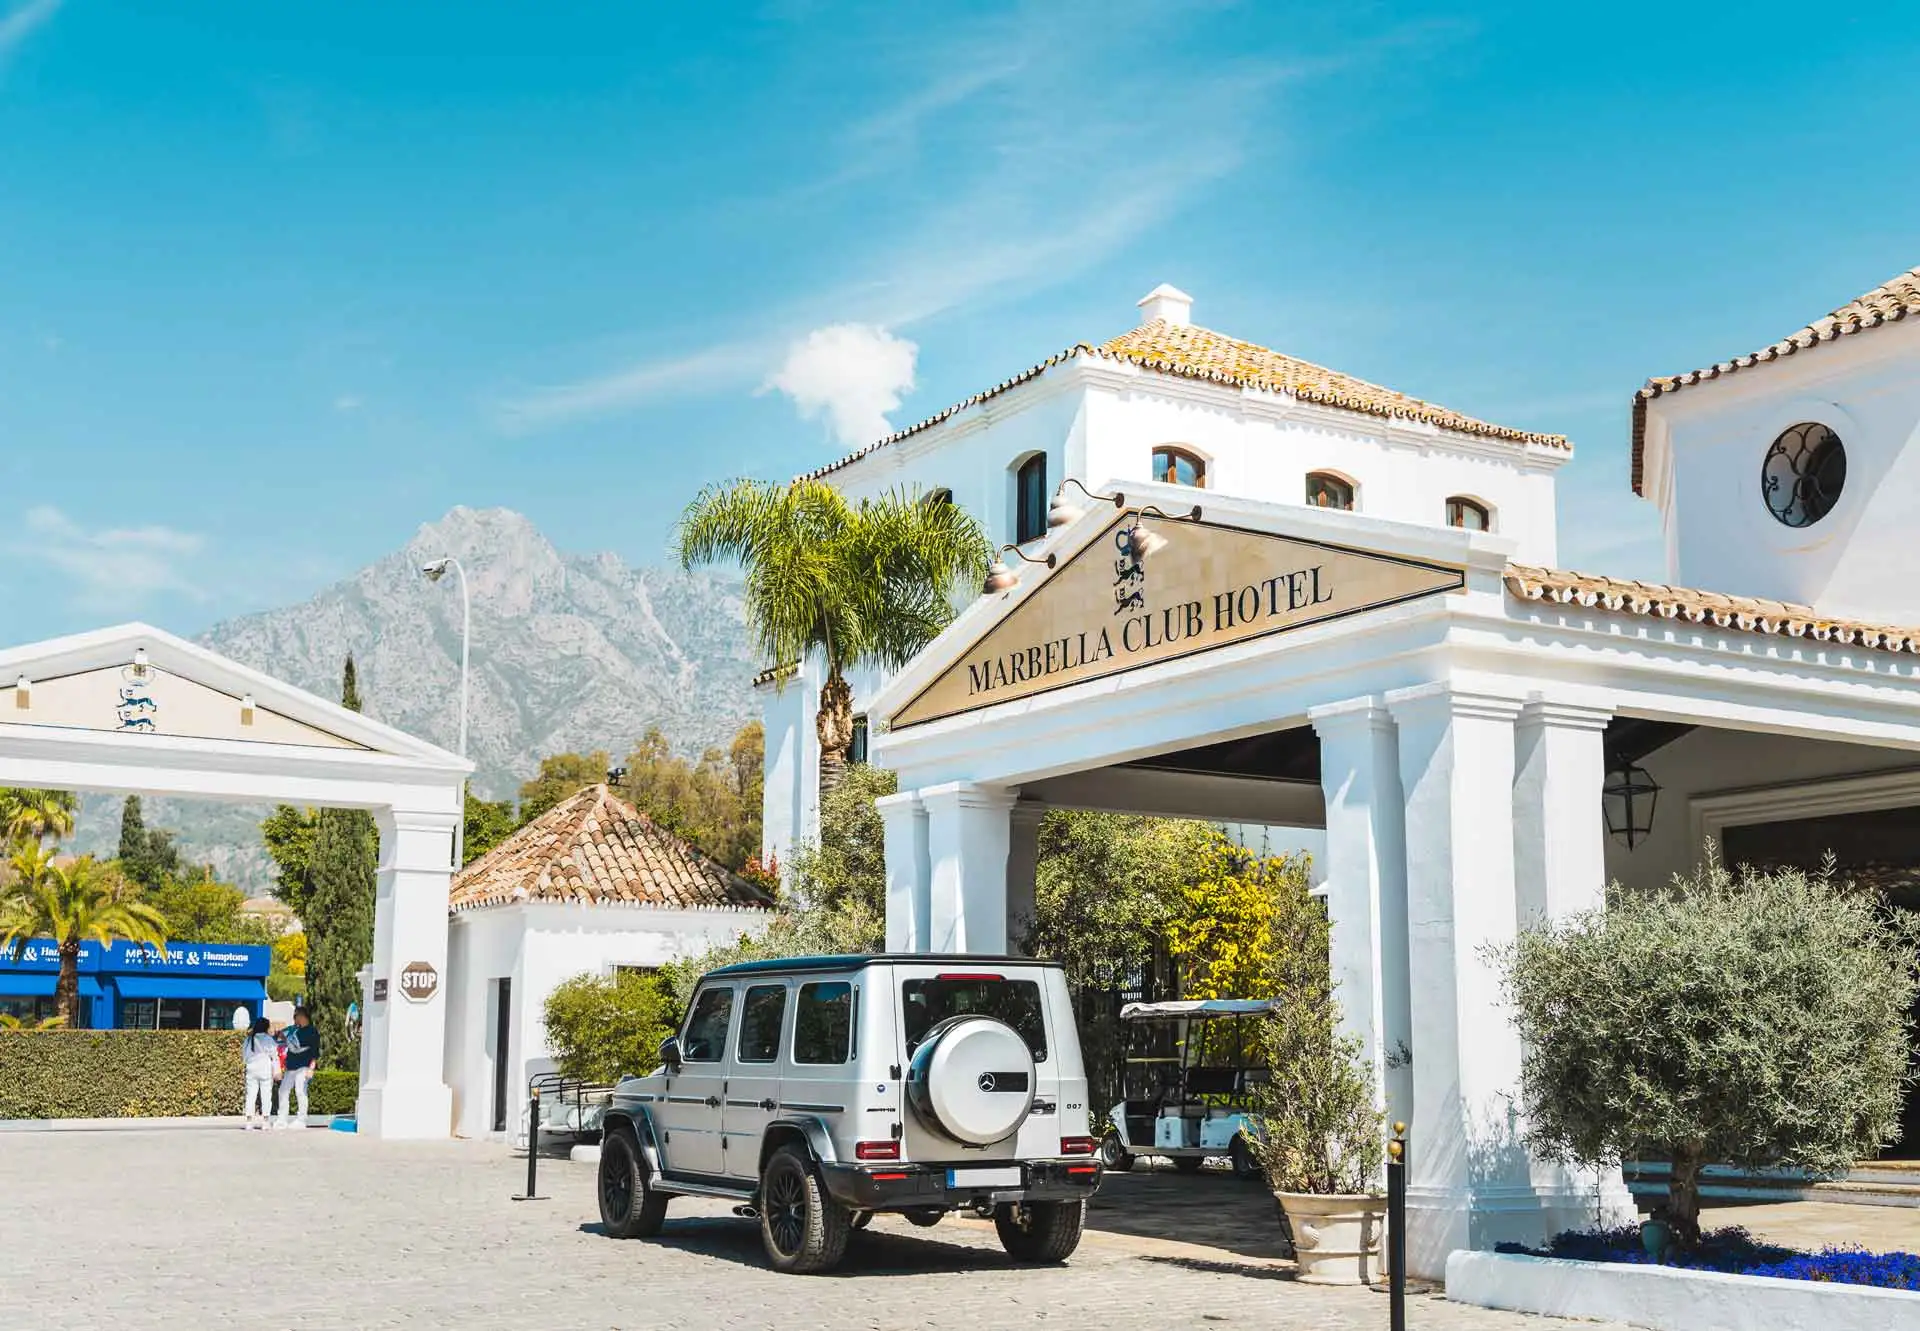 The Perfect Choice for Unforgettable Family Vacation Trips in Marbella